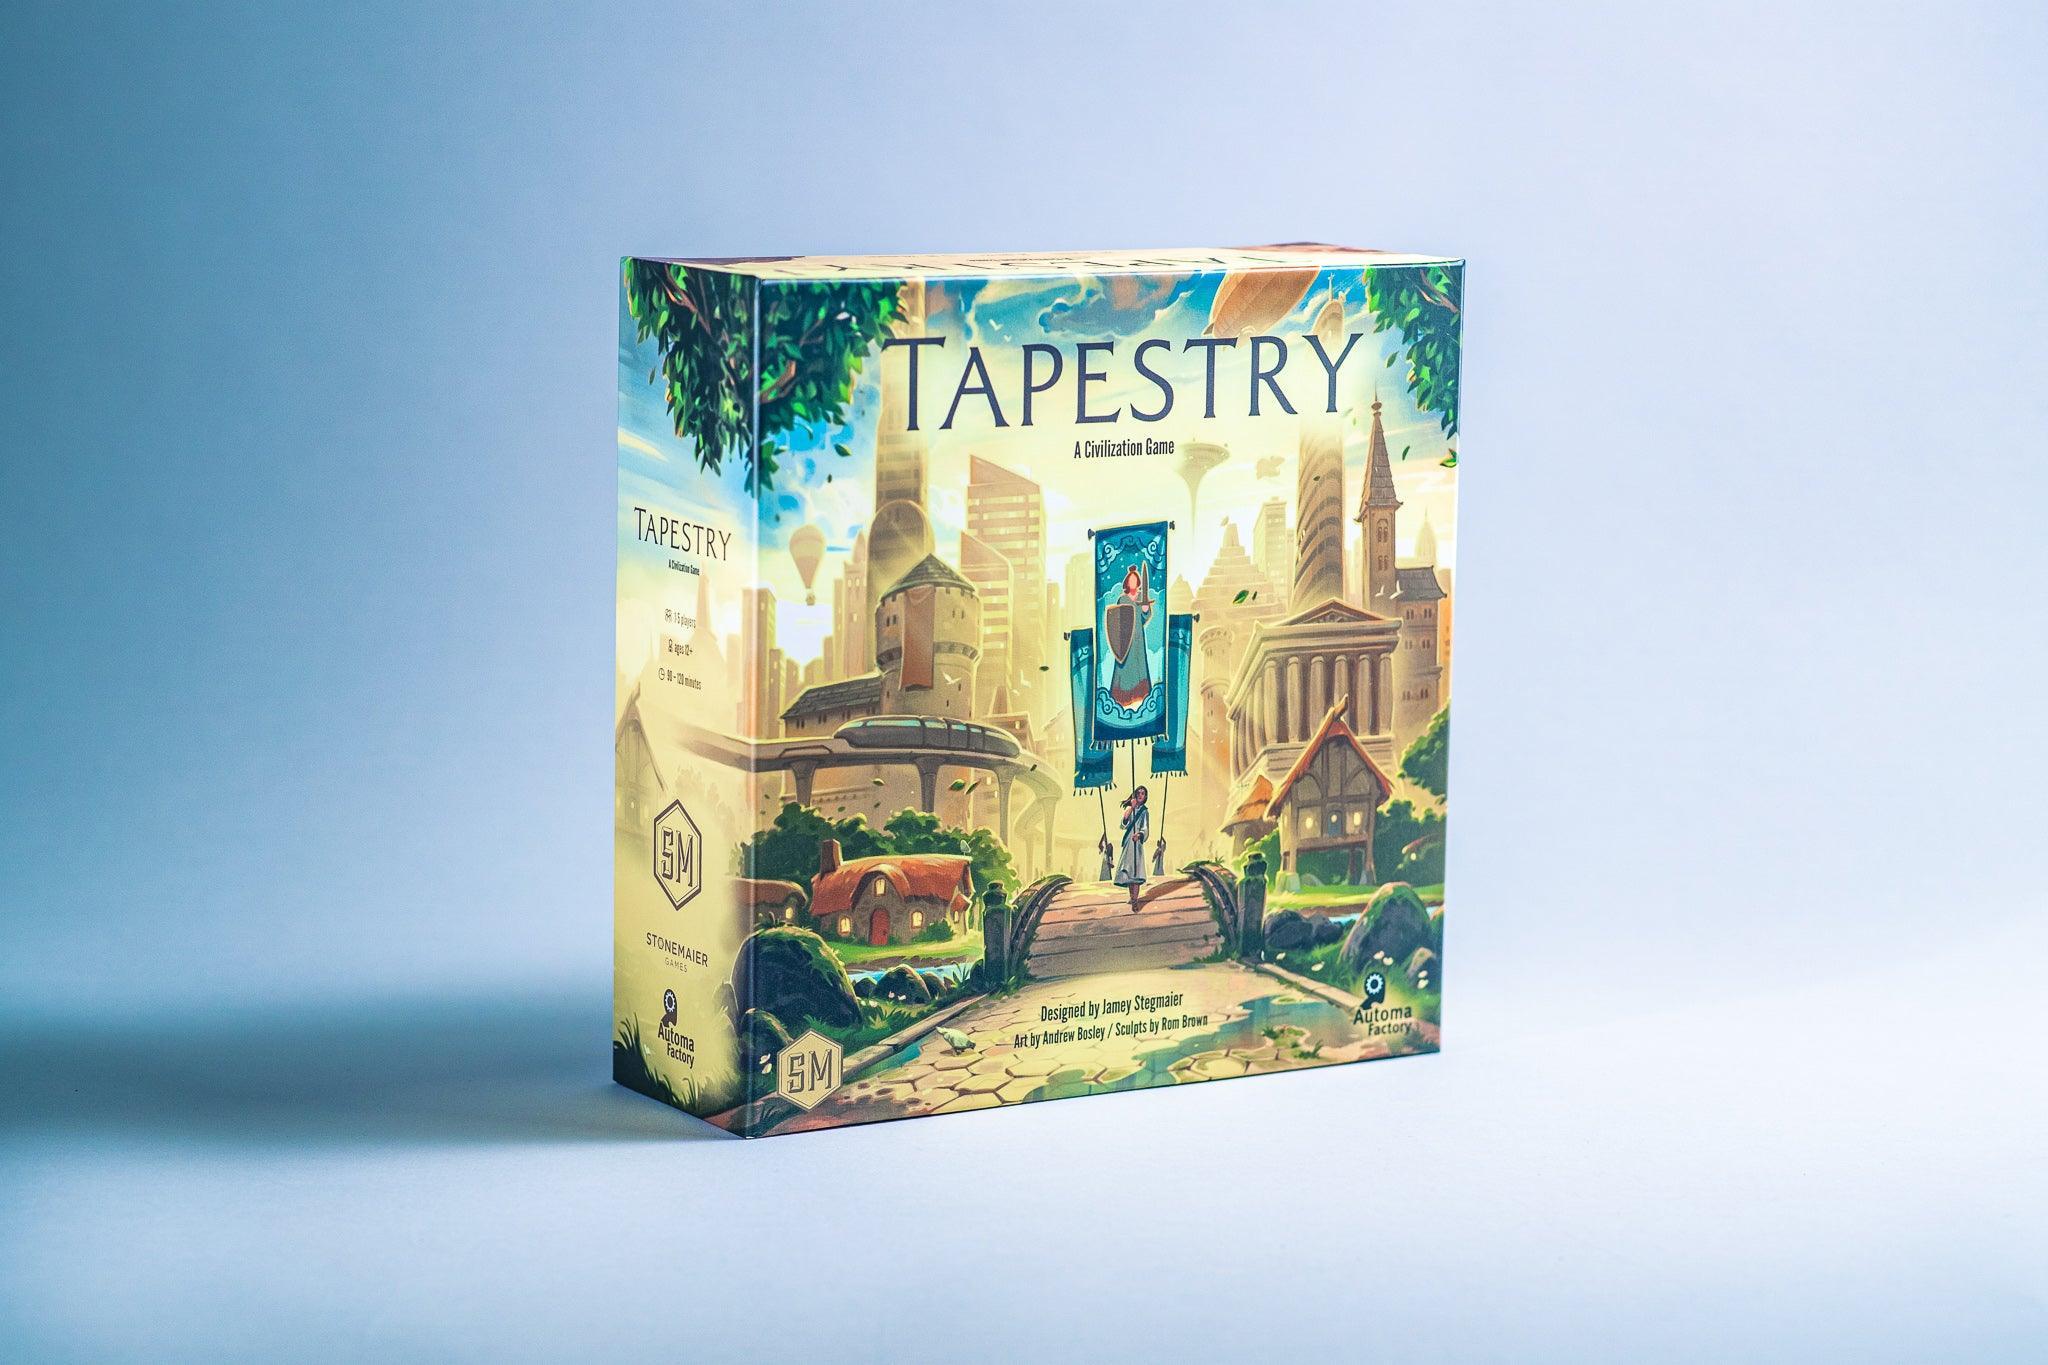 Tapestry - Gaming Library